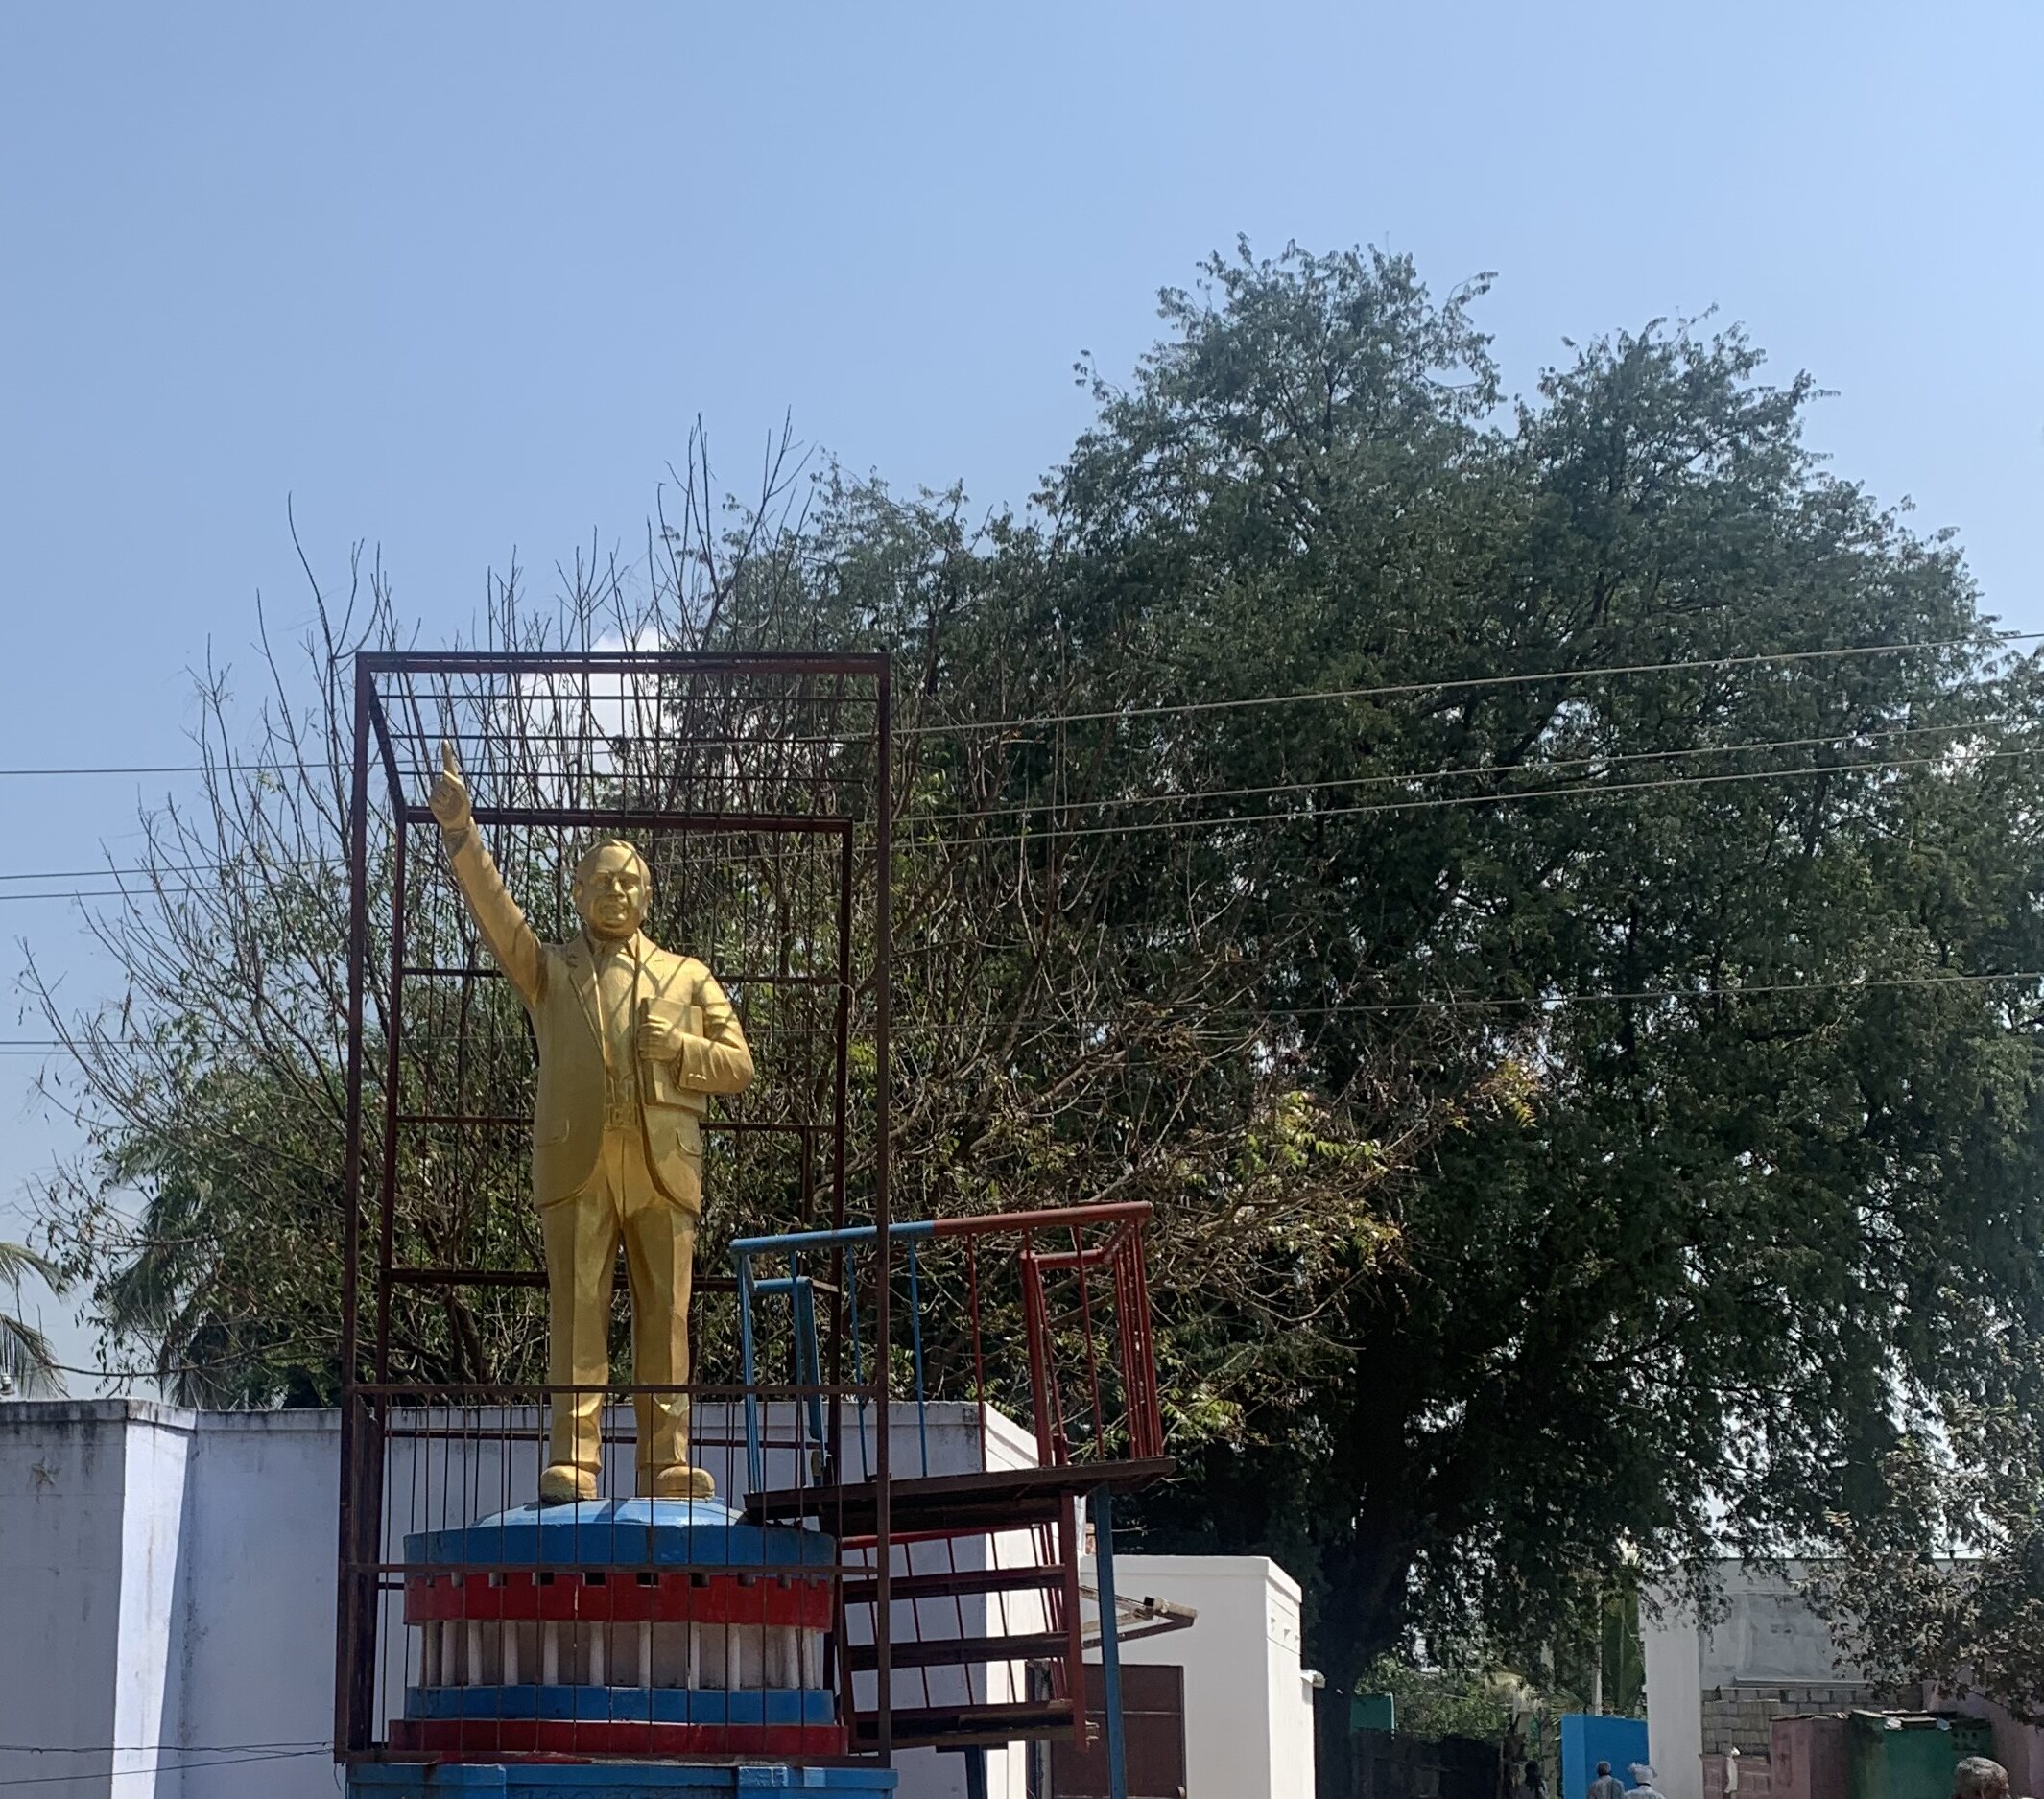 In TN, Ambedkar is caged for his own safety